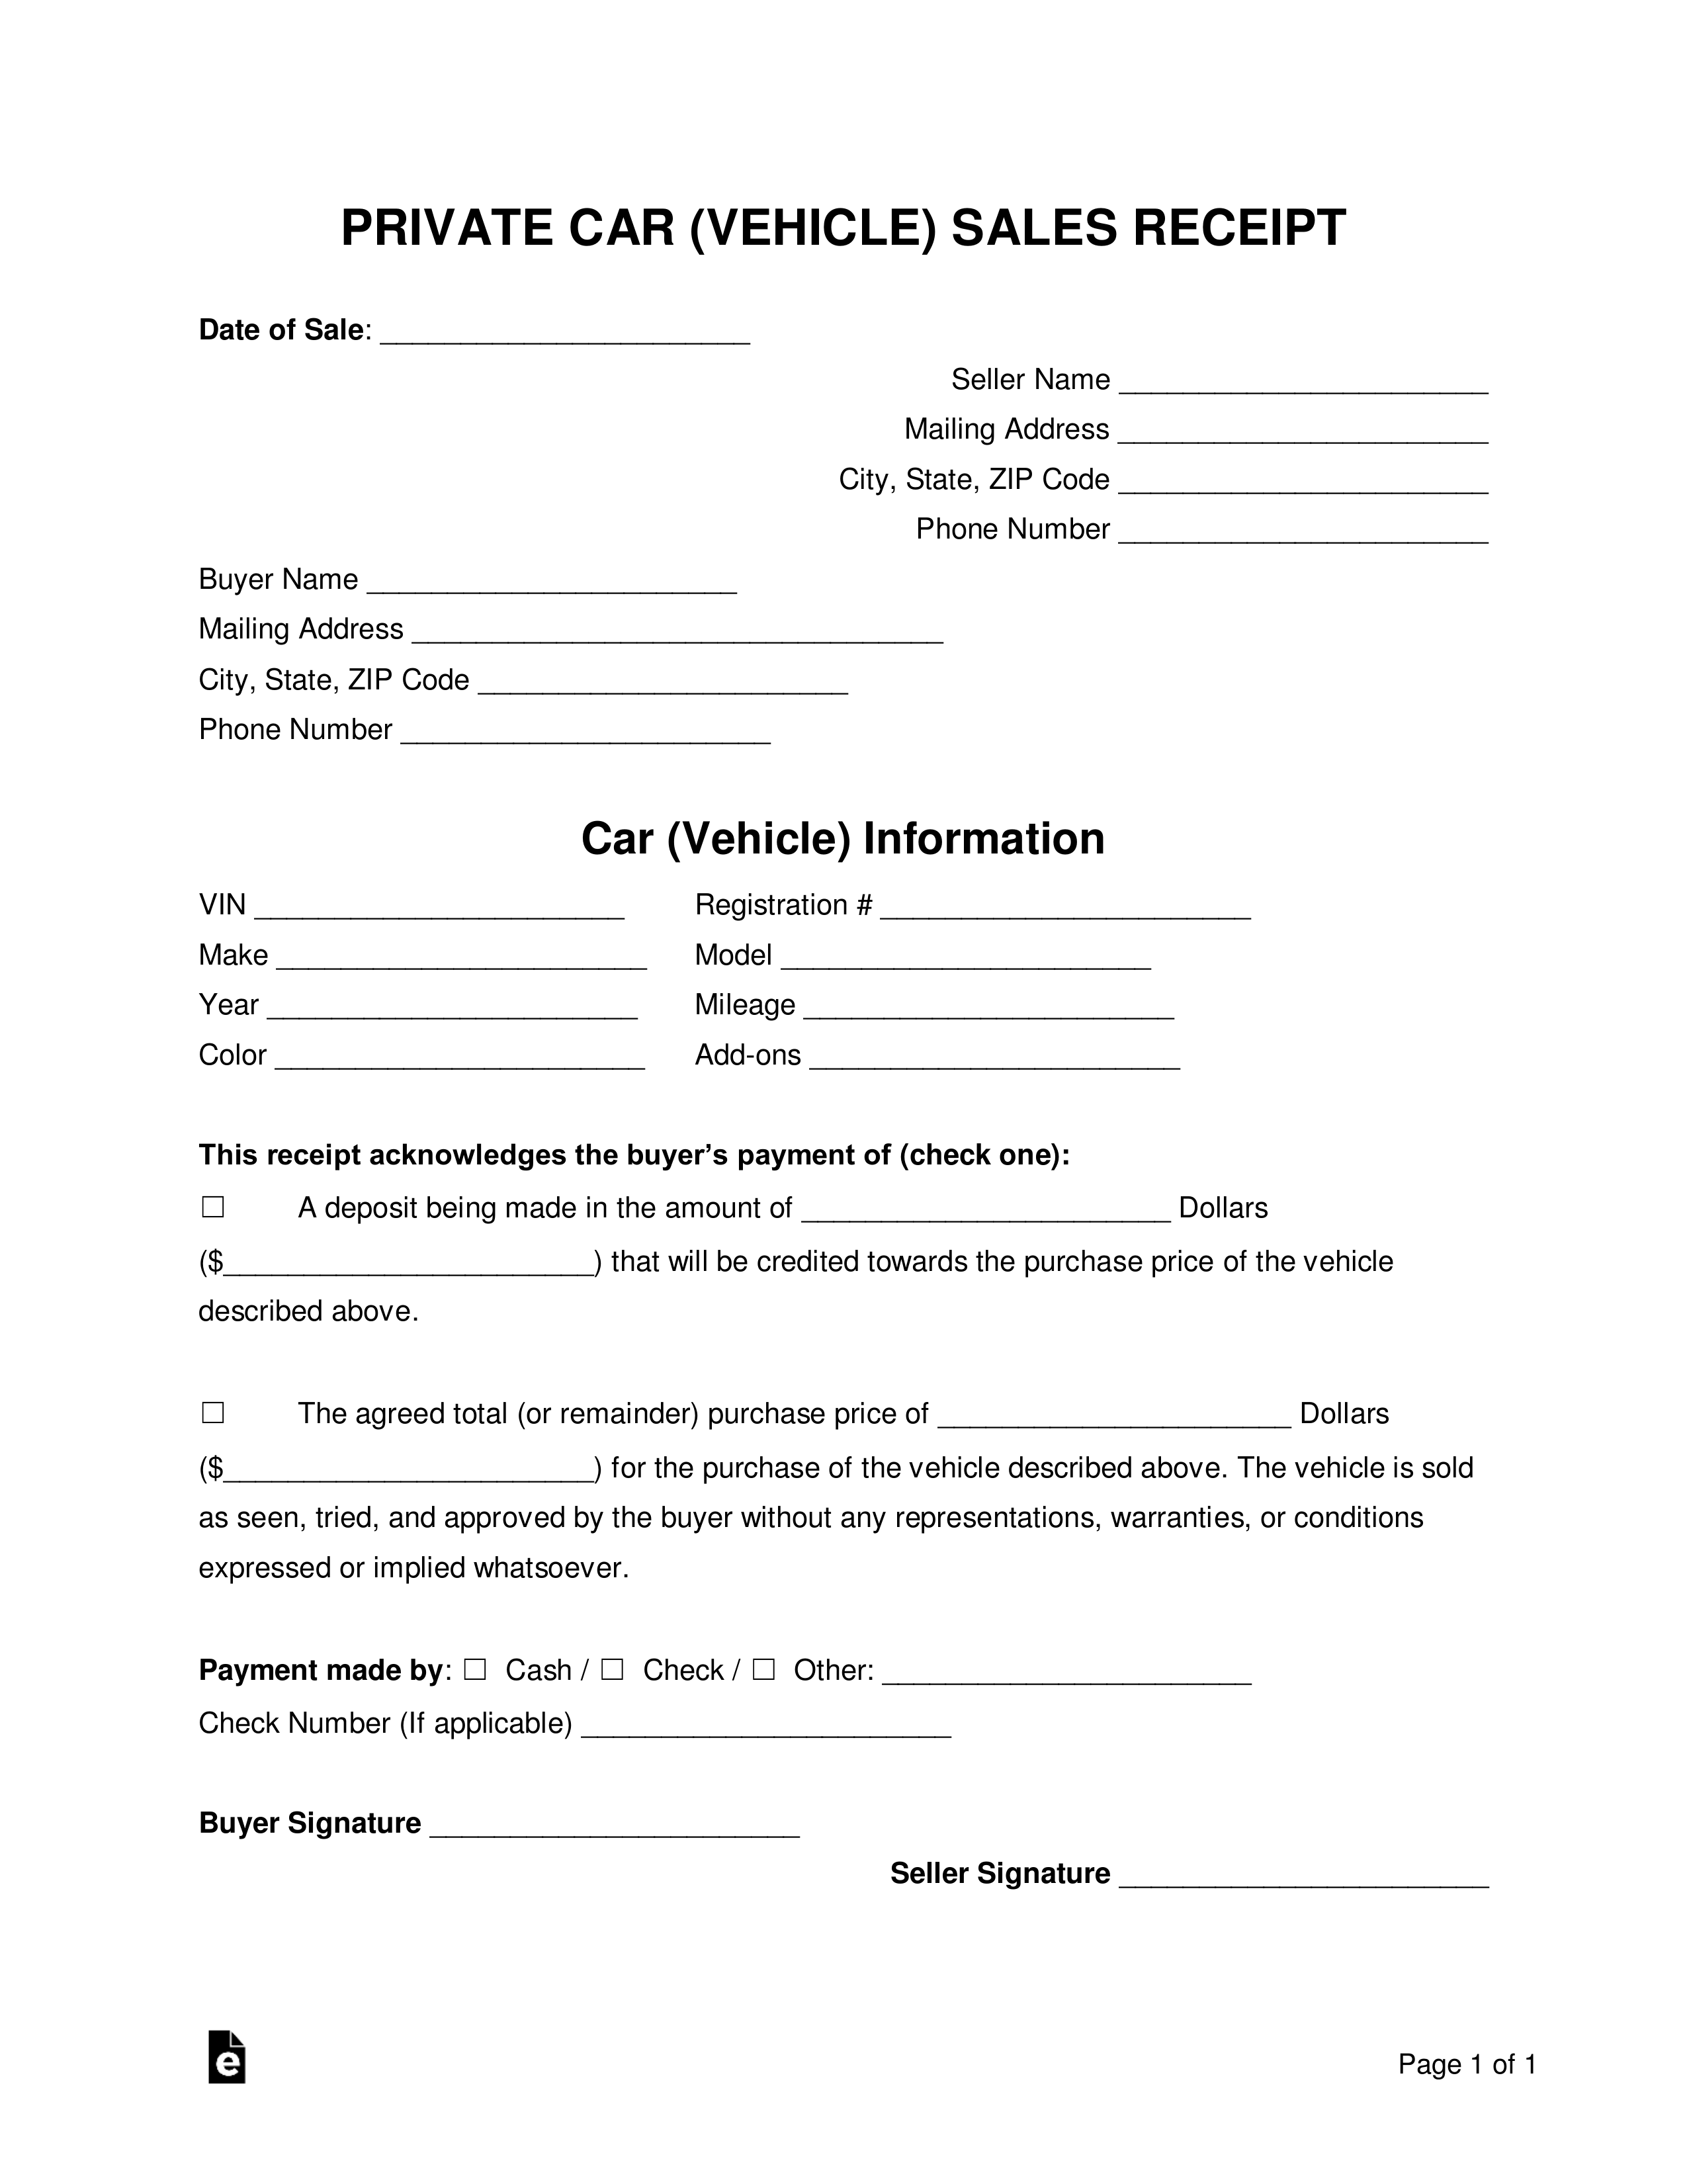 Free Vehicle (Private Sale) Receipt Template - PDF  Word – eForms Pertaining To Deposit Form For Vehicle Purchase Within Deposit Form For Vehicle Purchase